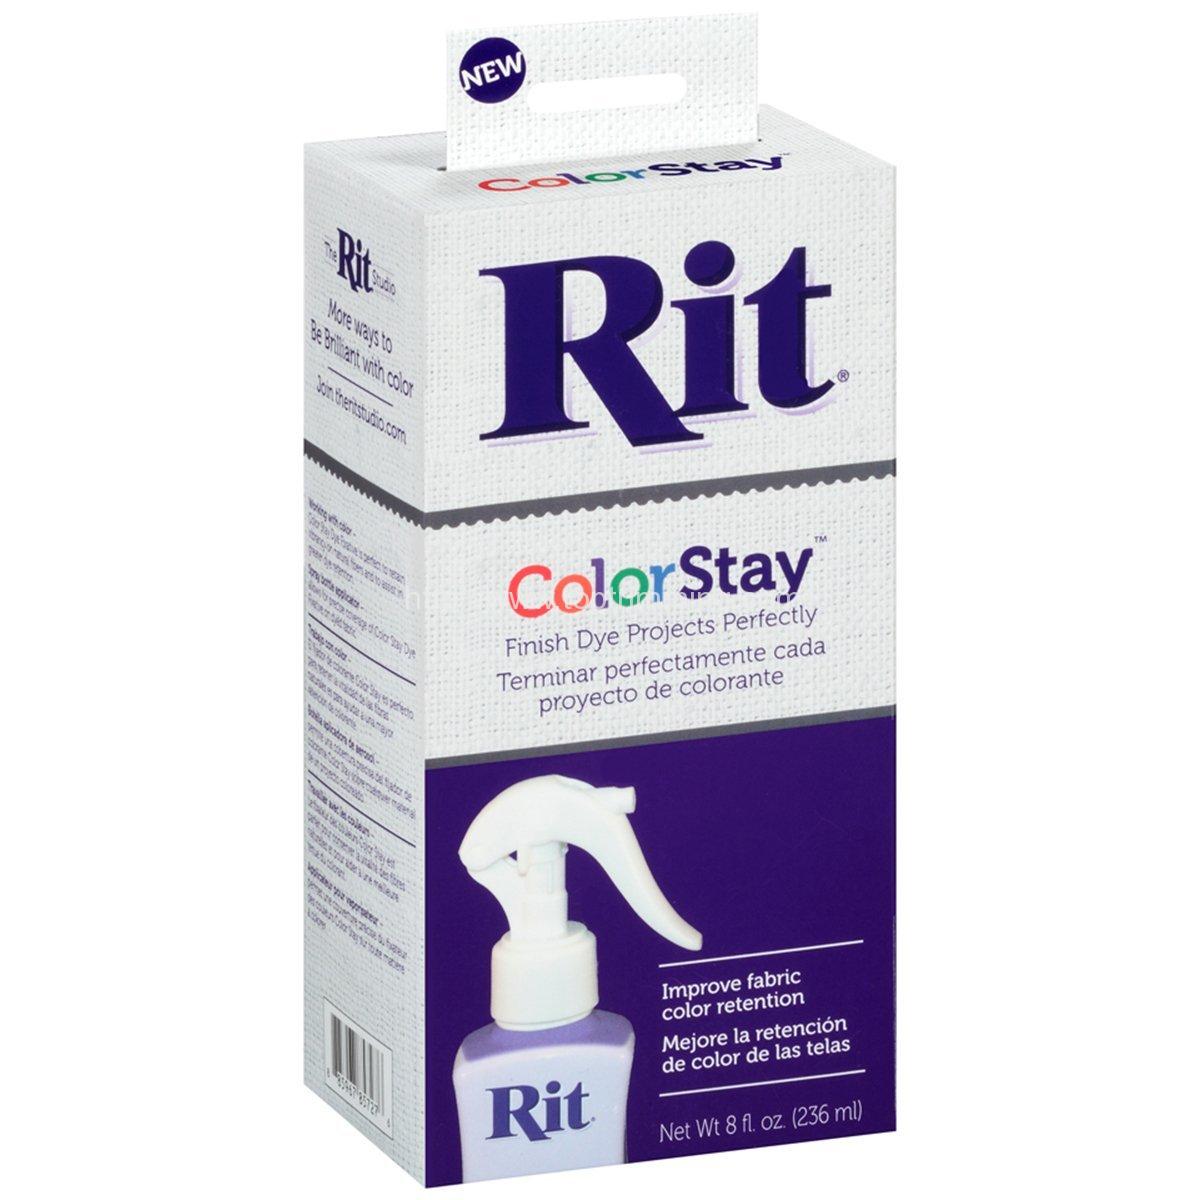 Rit Color Stay Dye Fabric Fixatives